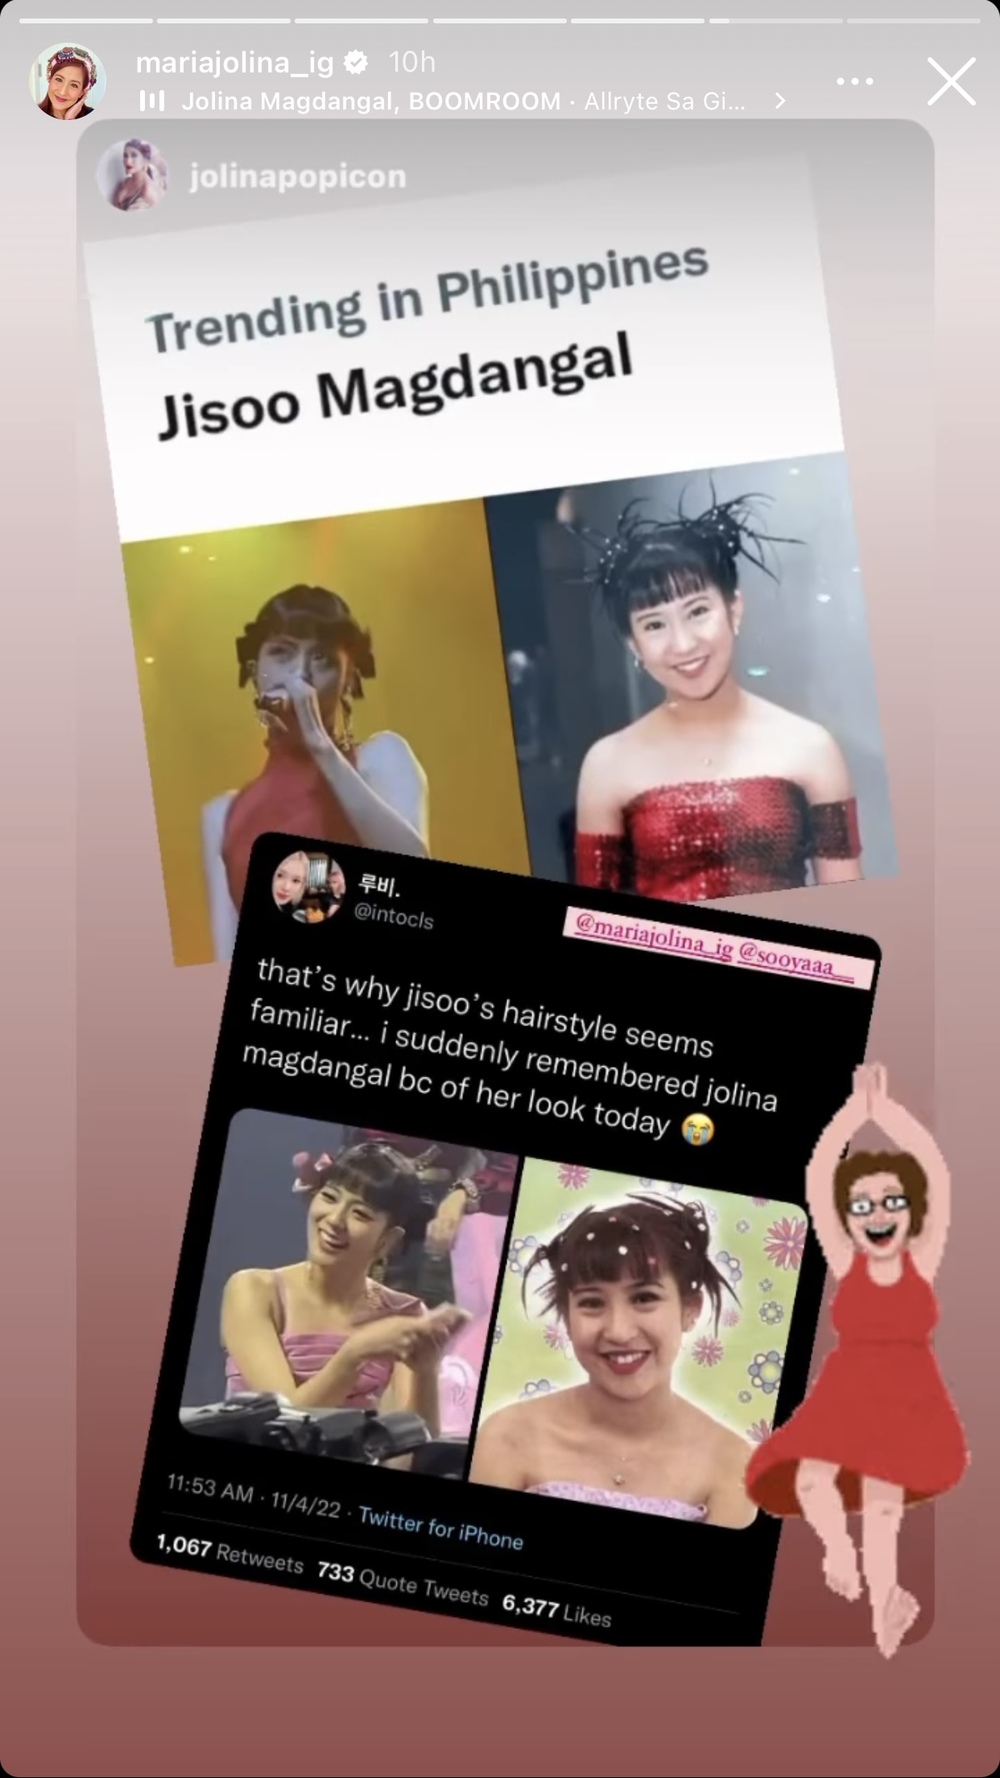 Jolina Magdangal reacts to being compared to Jisoo